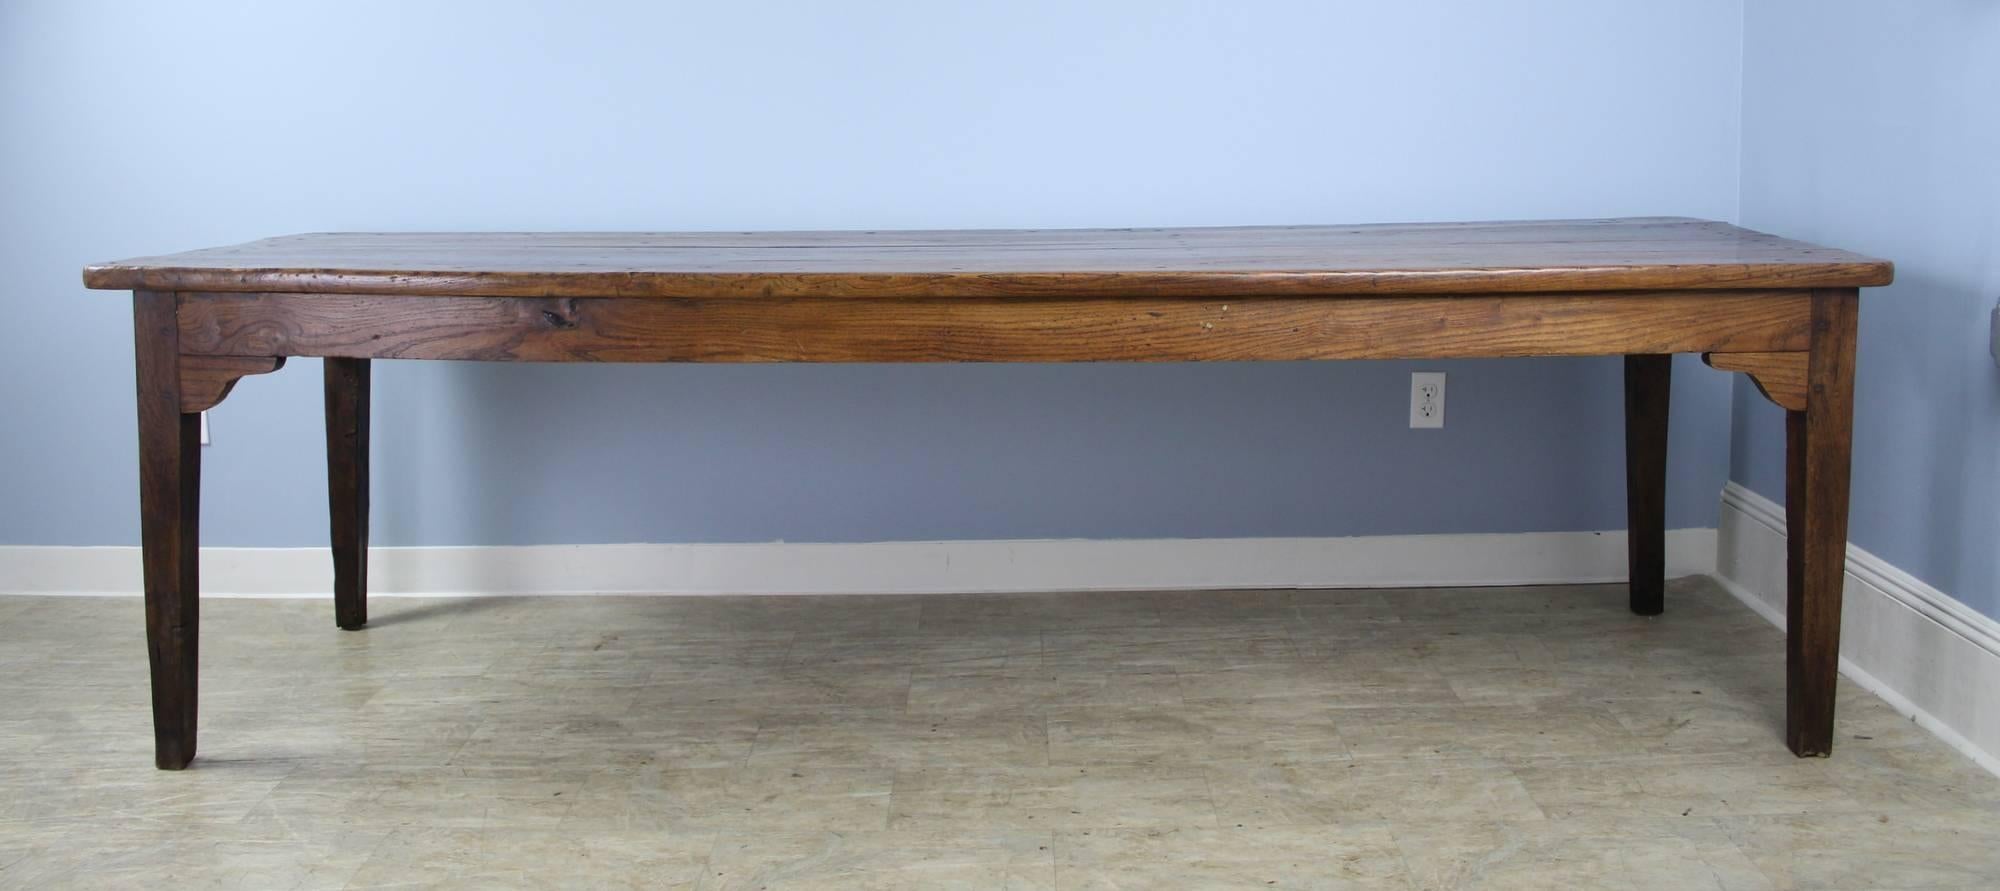 A long rustic elm farm table with glorious grain, a thick top and natural knot holes. The color and patina on this piece are really good. With 96 inches between the legs on the long side, this table can comfortable seat ten. The apron height of 24.5